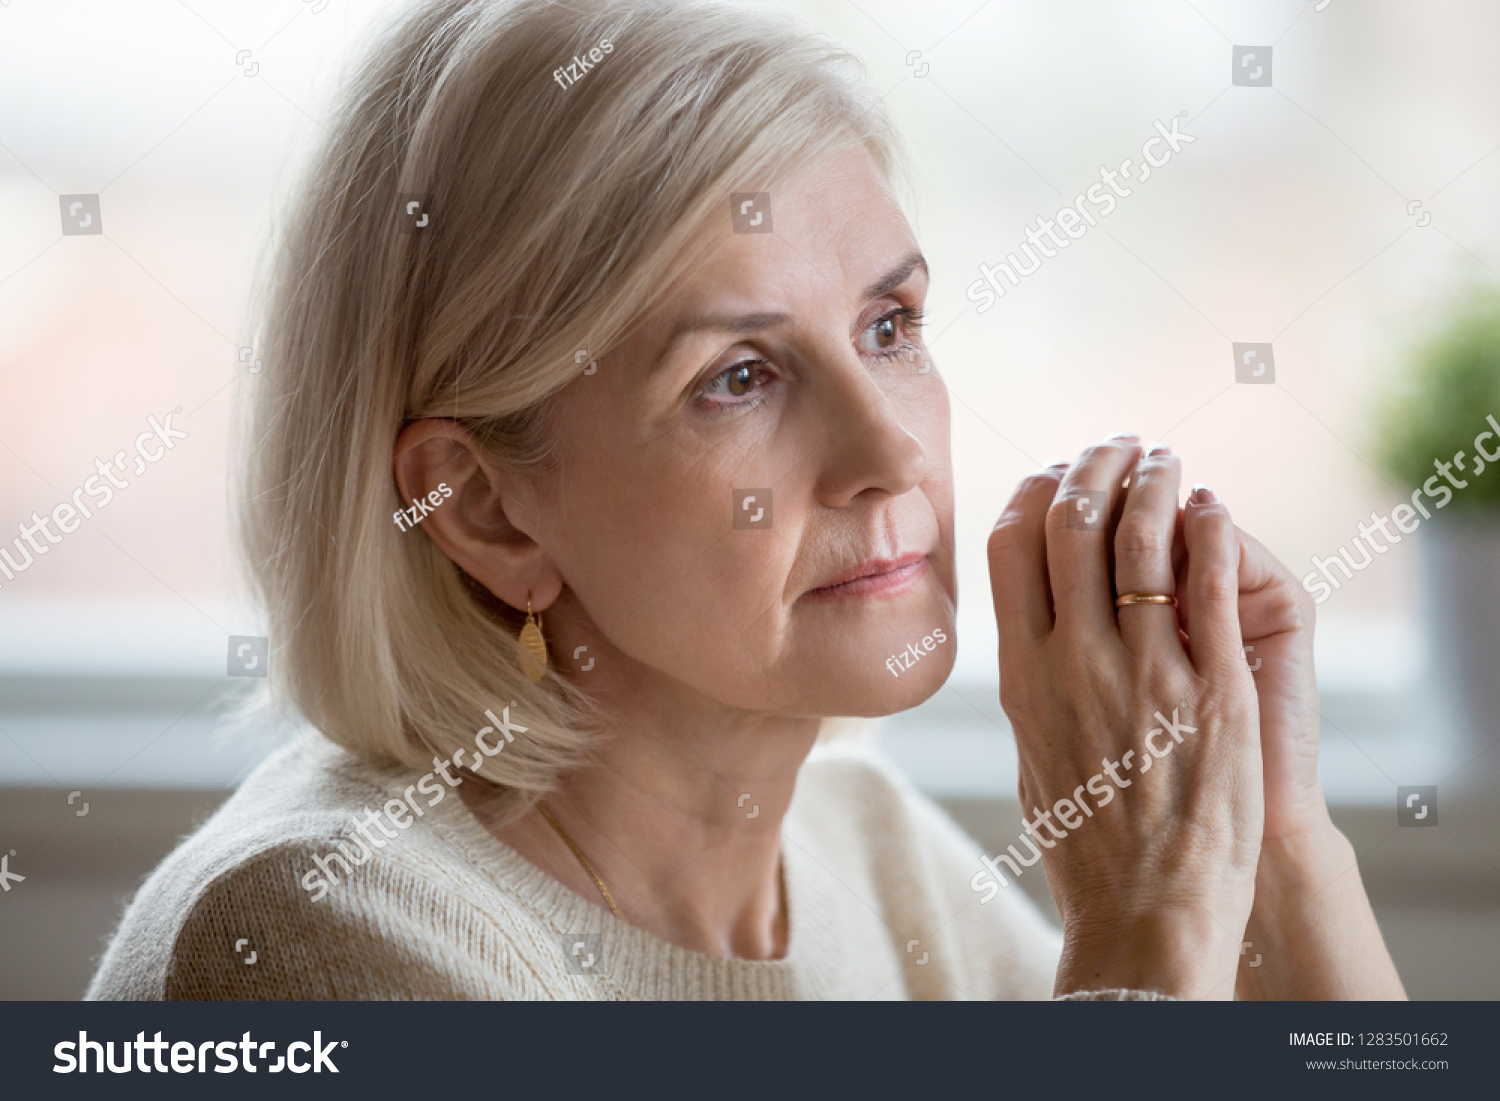 Close up portrait of beautiful sad woman folding hands together near her face, thinking about life. Aging is period of physical decline and senile dementia, mental disorders emotional problems concept #1283501662